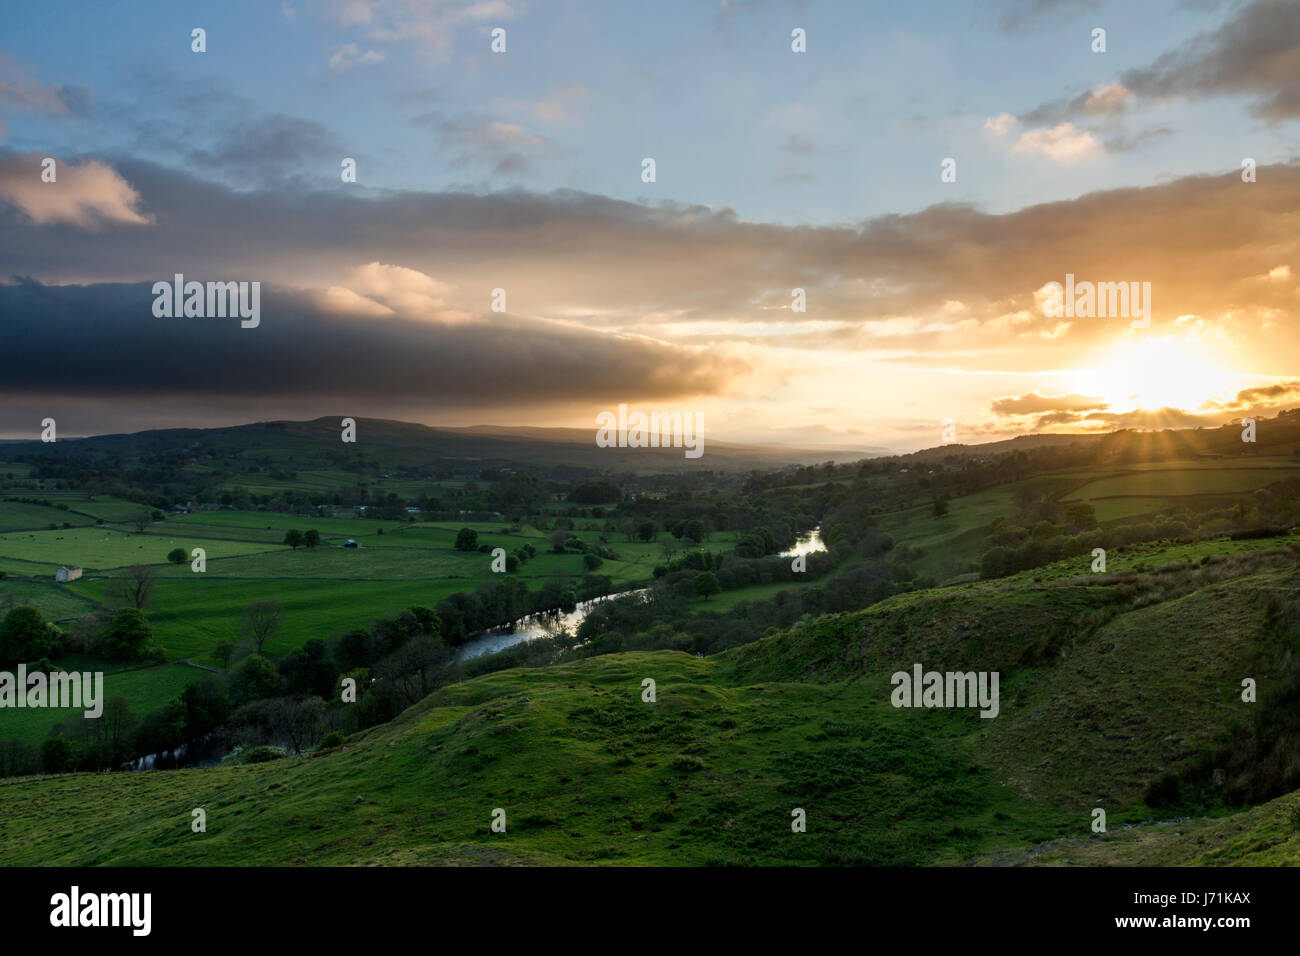 Whistle Crag, Middleton-in-Teesdale, County Durham. Monday 22nd May 2017.  UK Weather.  Golden light illuminates the River Tees in Upper Teesdale as the sun begins to set over the North Pennines in Northeast England.  © David Forster/Alamy Live News. Stock Photo